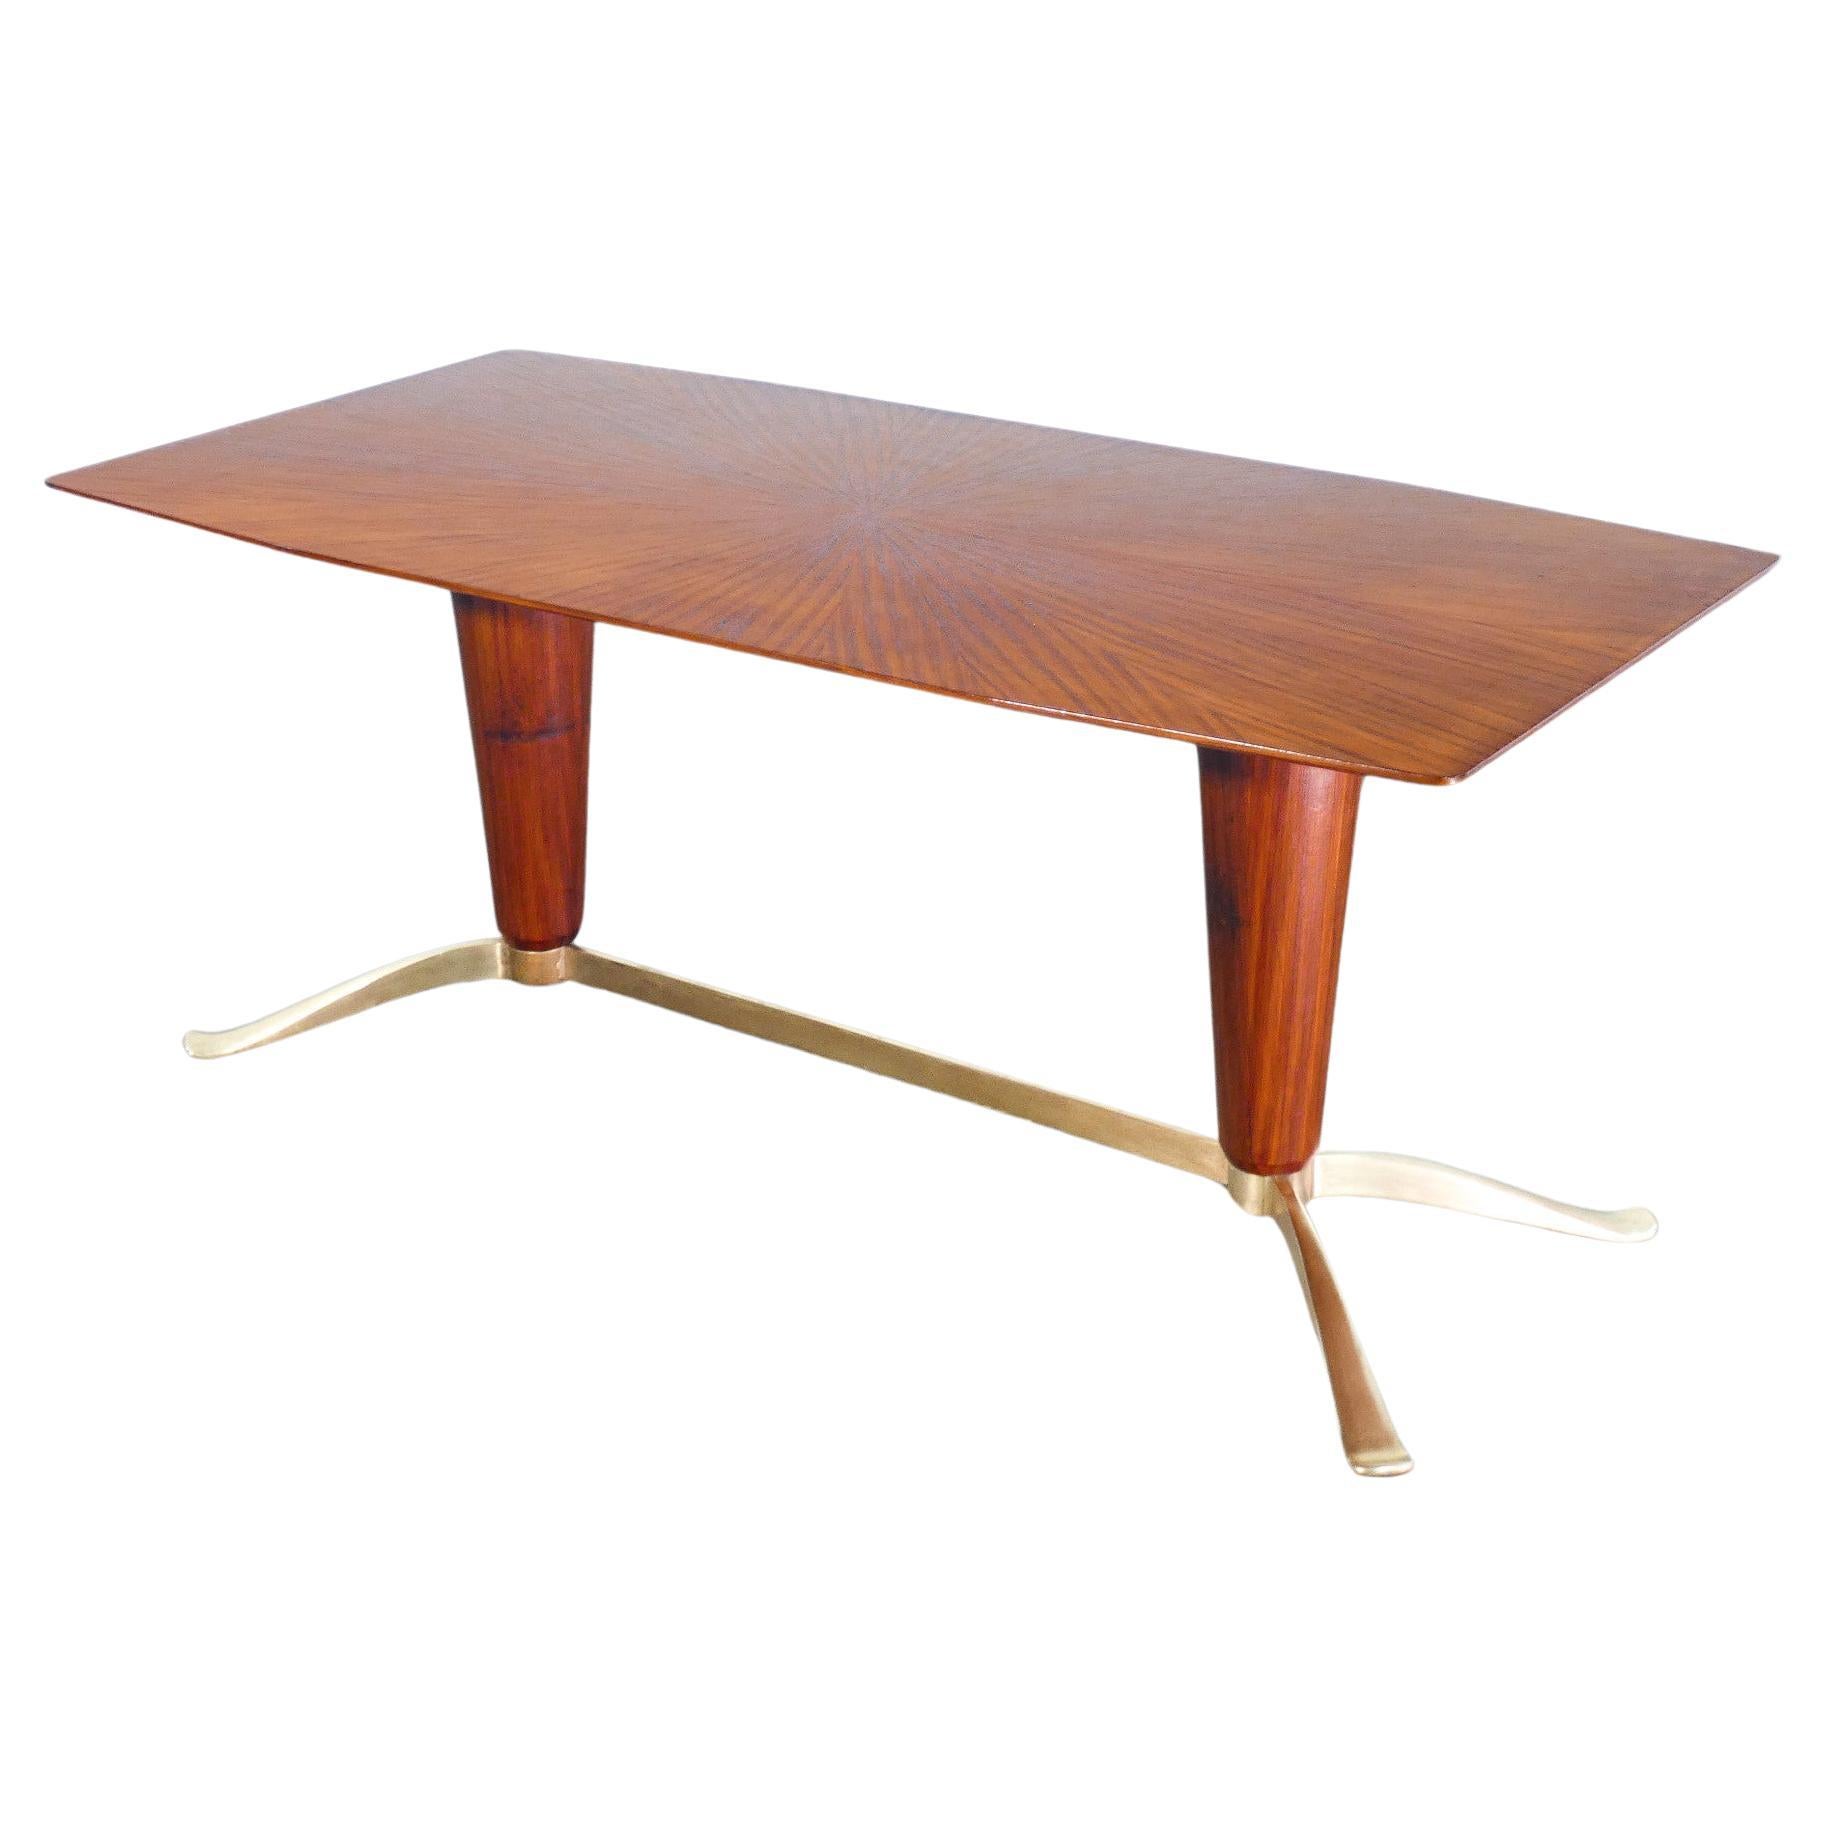 Italian design table from the 1940s attributed to the hand of Paolo BUFFA For Sale